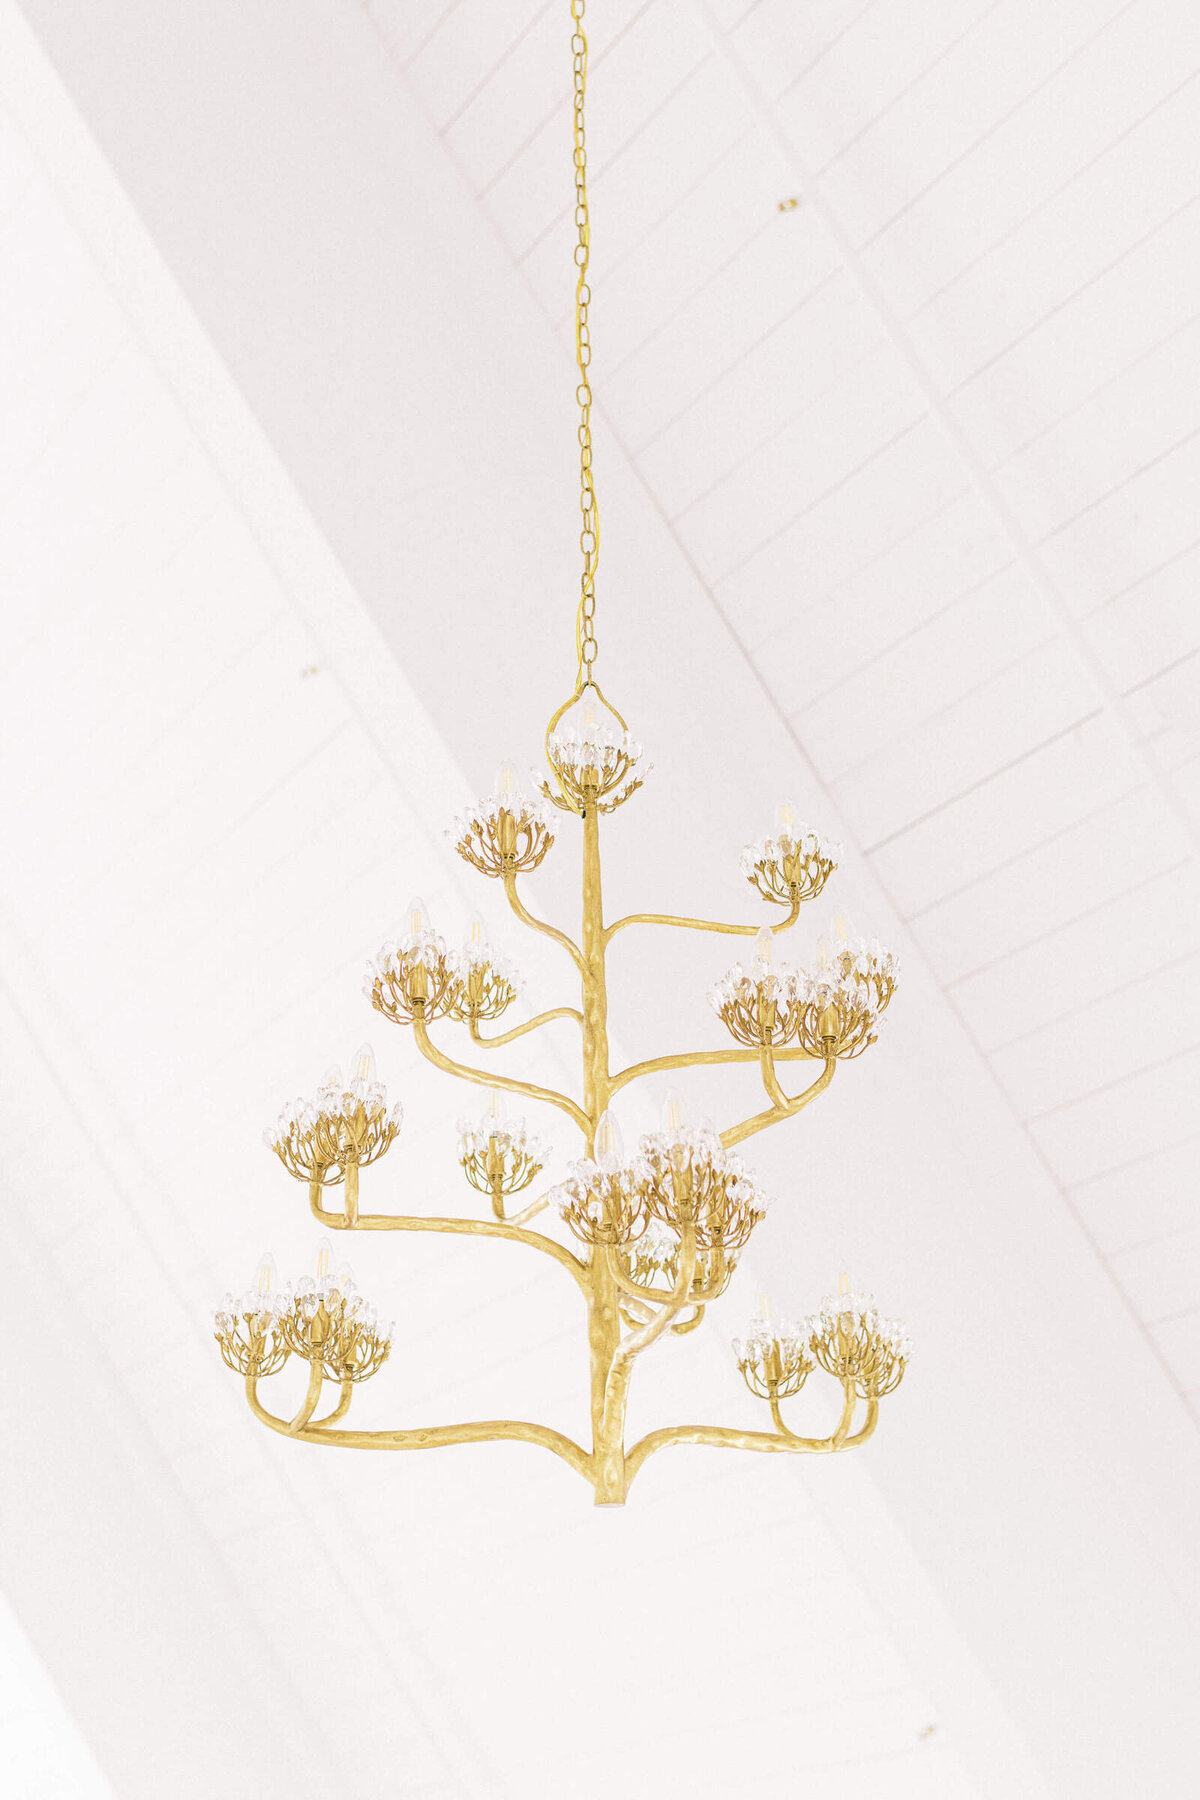 Elegant chandelier at North Texas wedding at The Nest at Ruth Farms